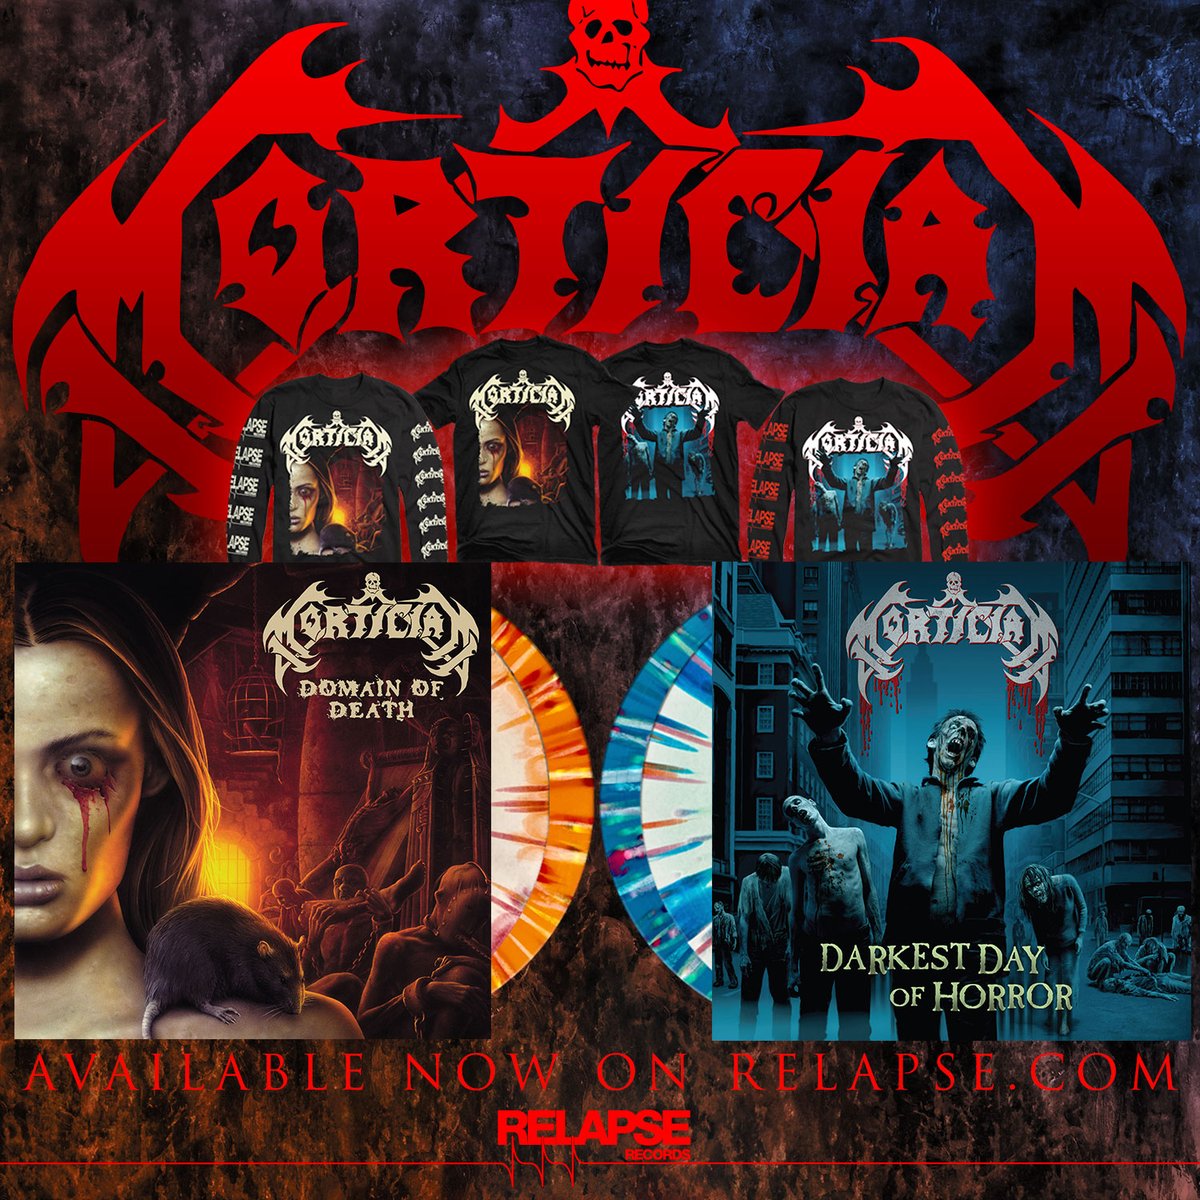 #MORTICIAN's Domain of Death & Darkest Day of Horror vinyl / merch are available now and shipping this week! bit.ly/morticianreiss…